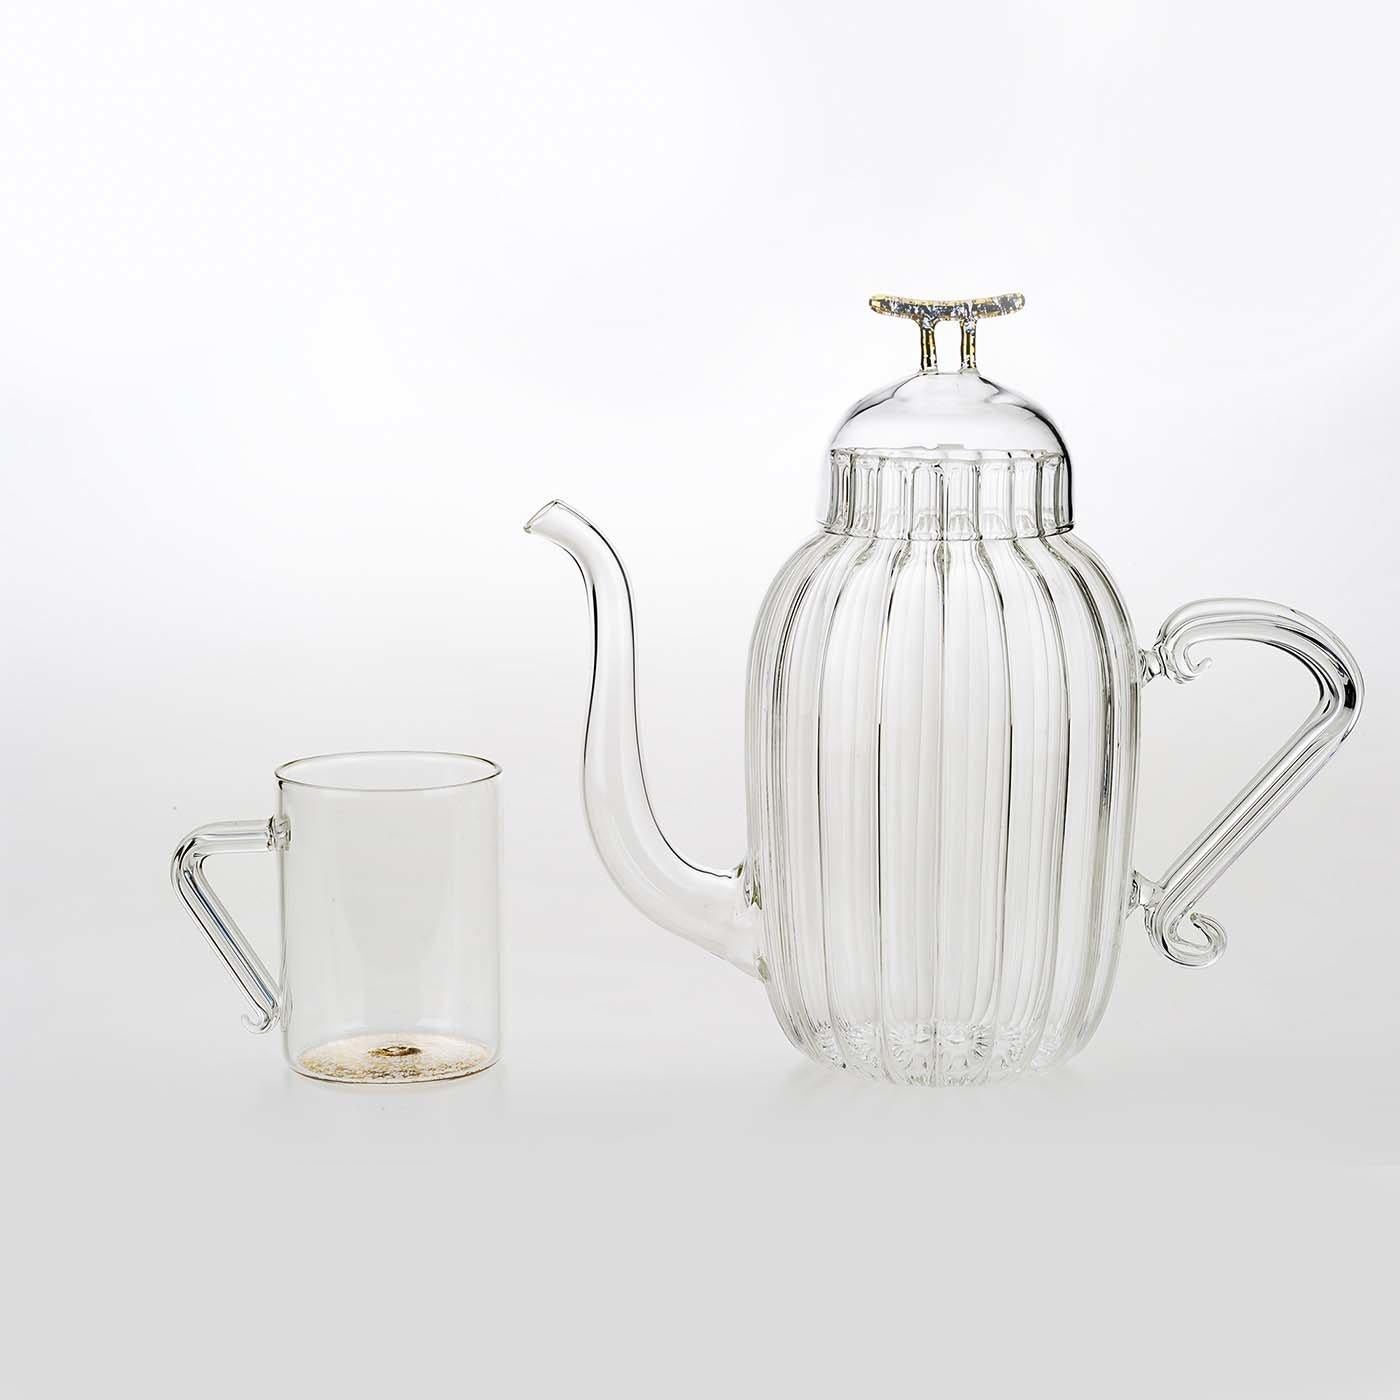 Crafted entirely by hand of mouth-blown glass, this elegant teapot will be a charming addition to any home and will especially complement Chinese-inspired interior designs, thanks to the elegant ferrule of the lid, adorned with stunning gold. The